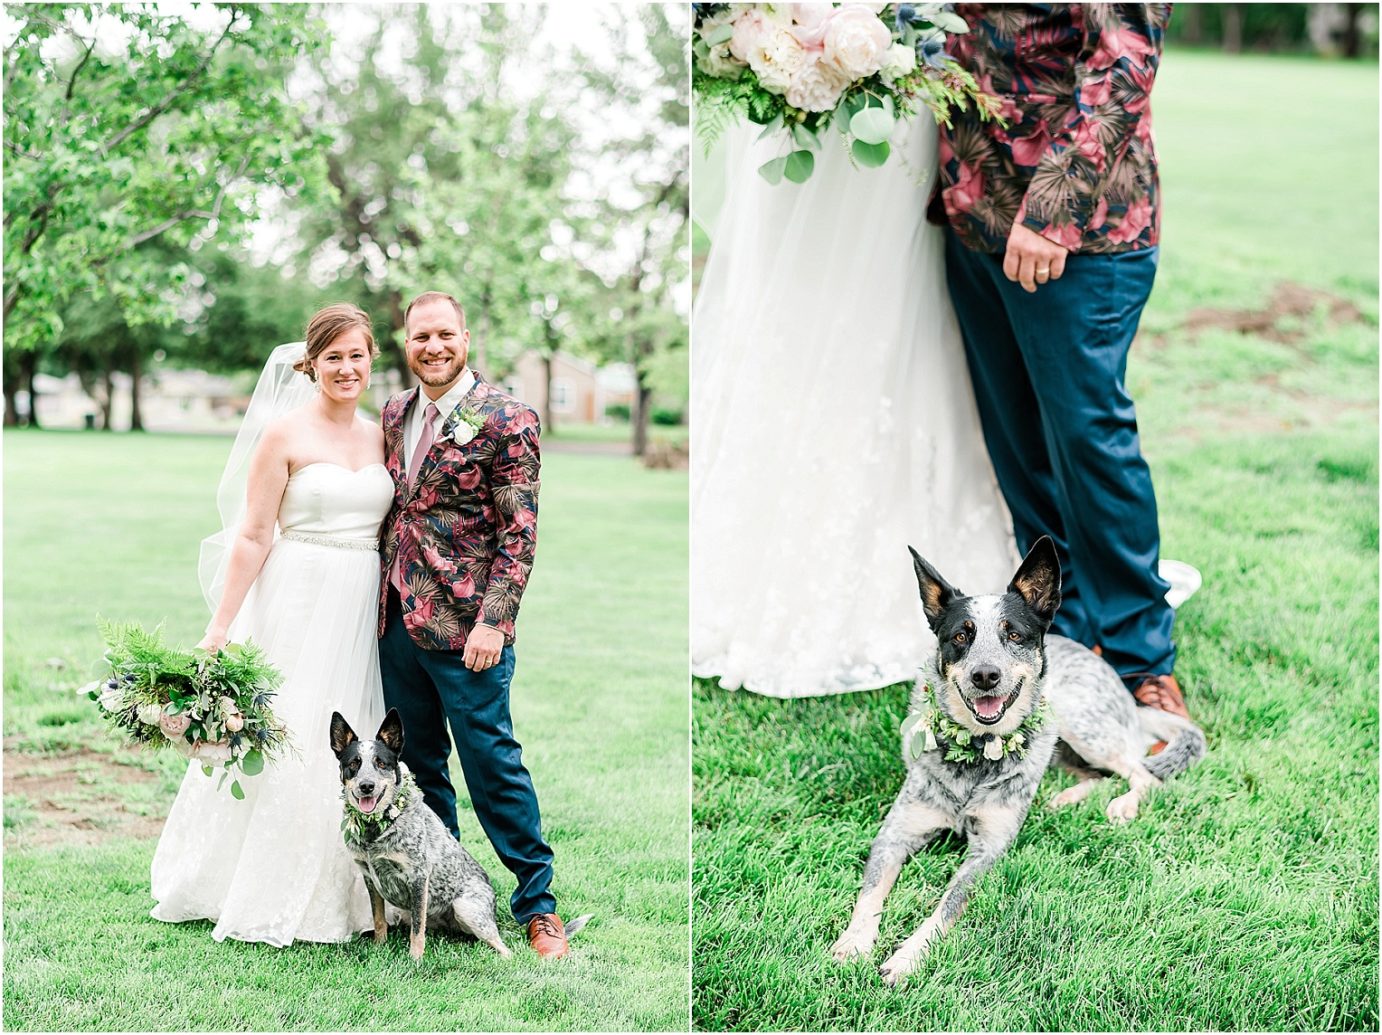 Intimate Park Wedding Richland Photographer Nick and Kelly bride and groom with dog